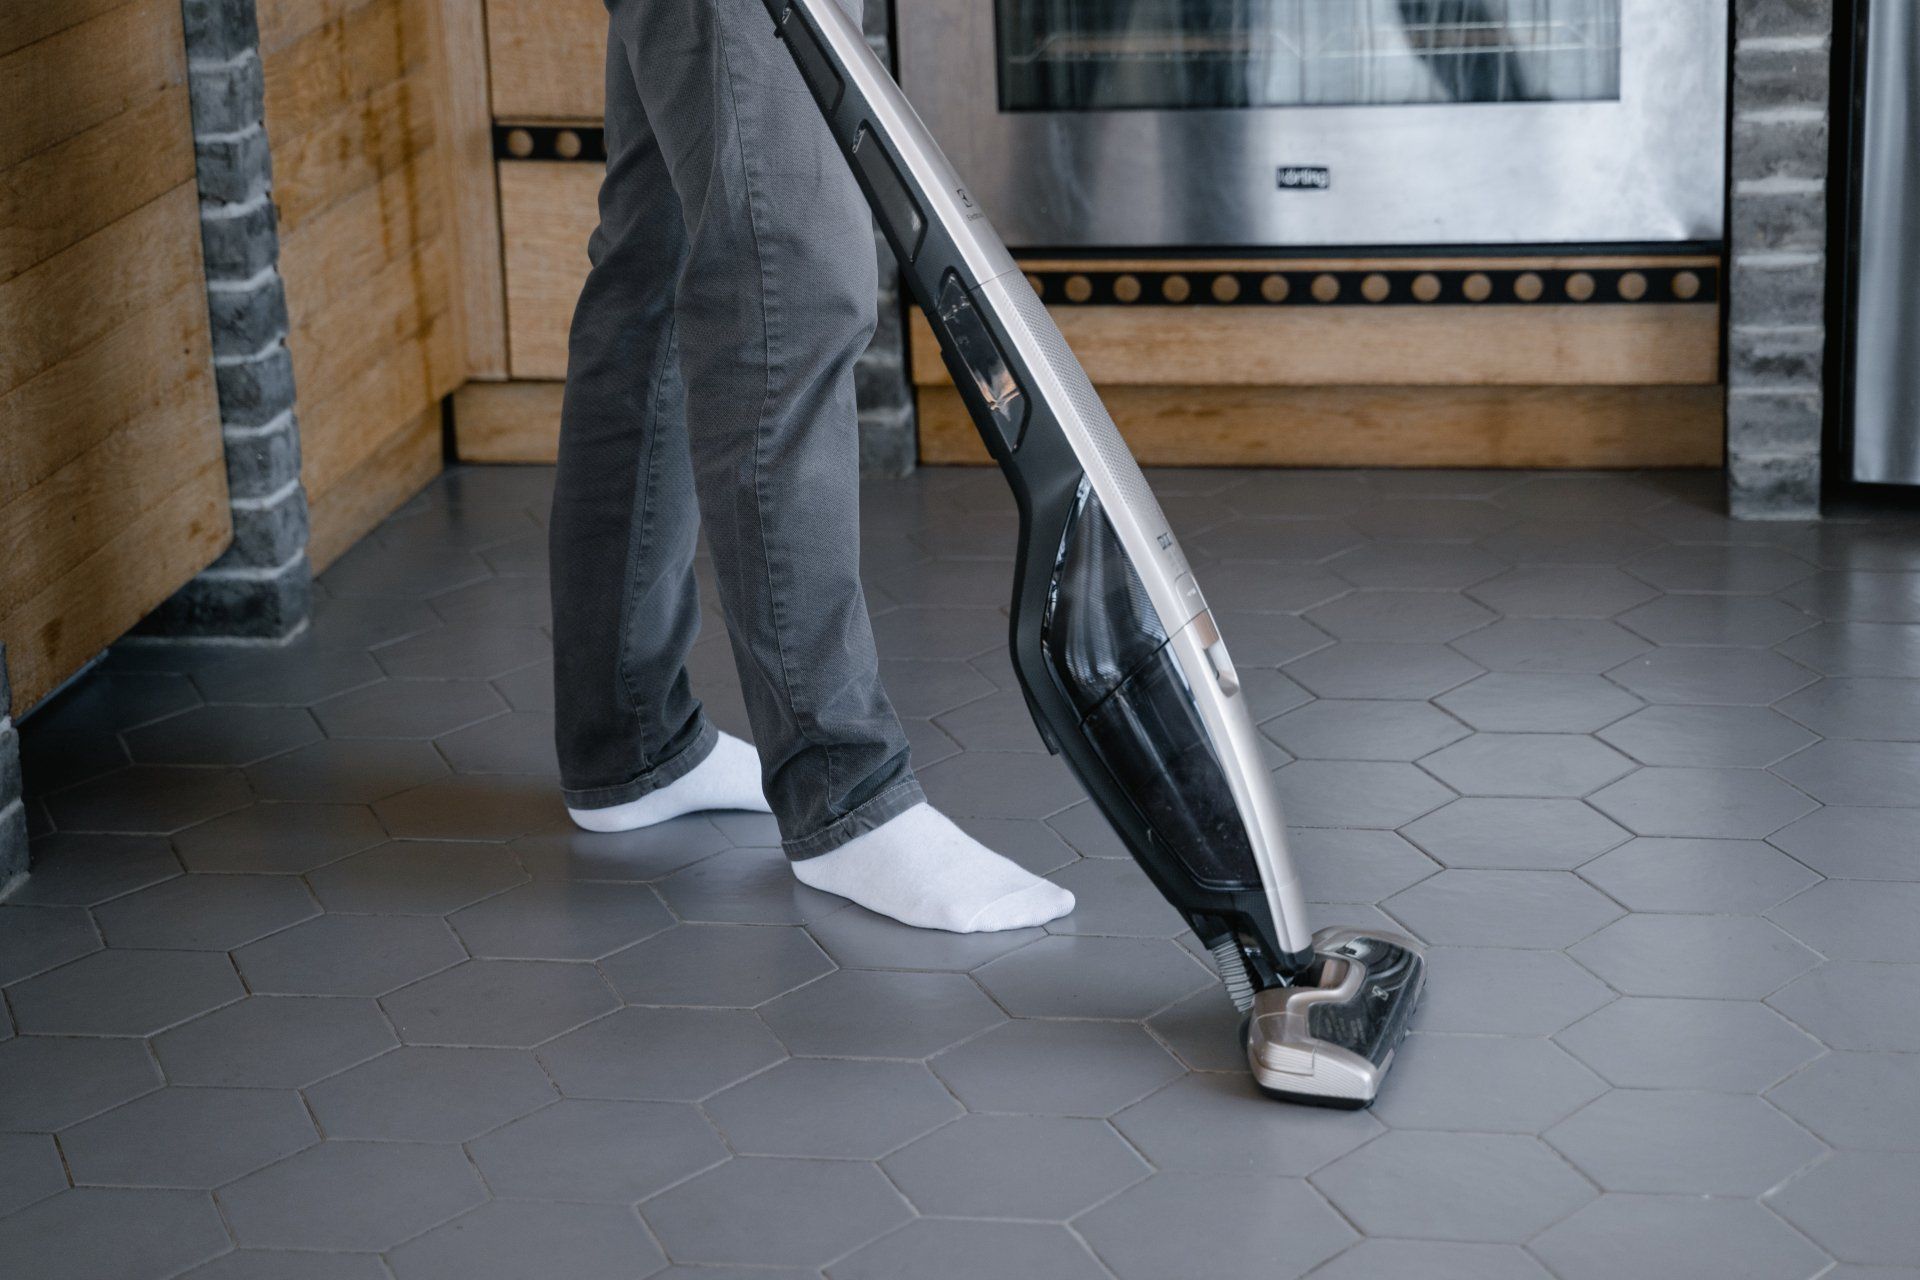 Cleaning the Floor with a Vacuum